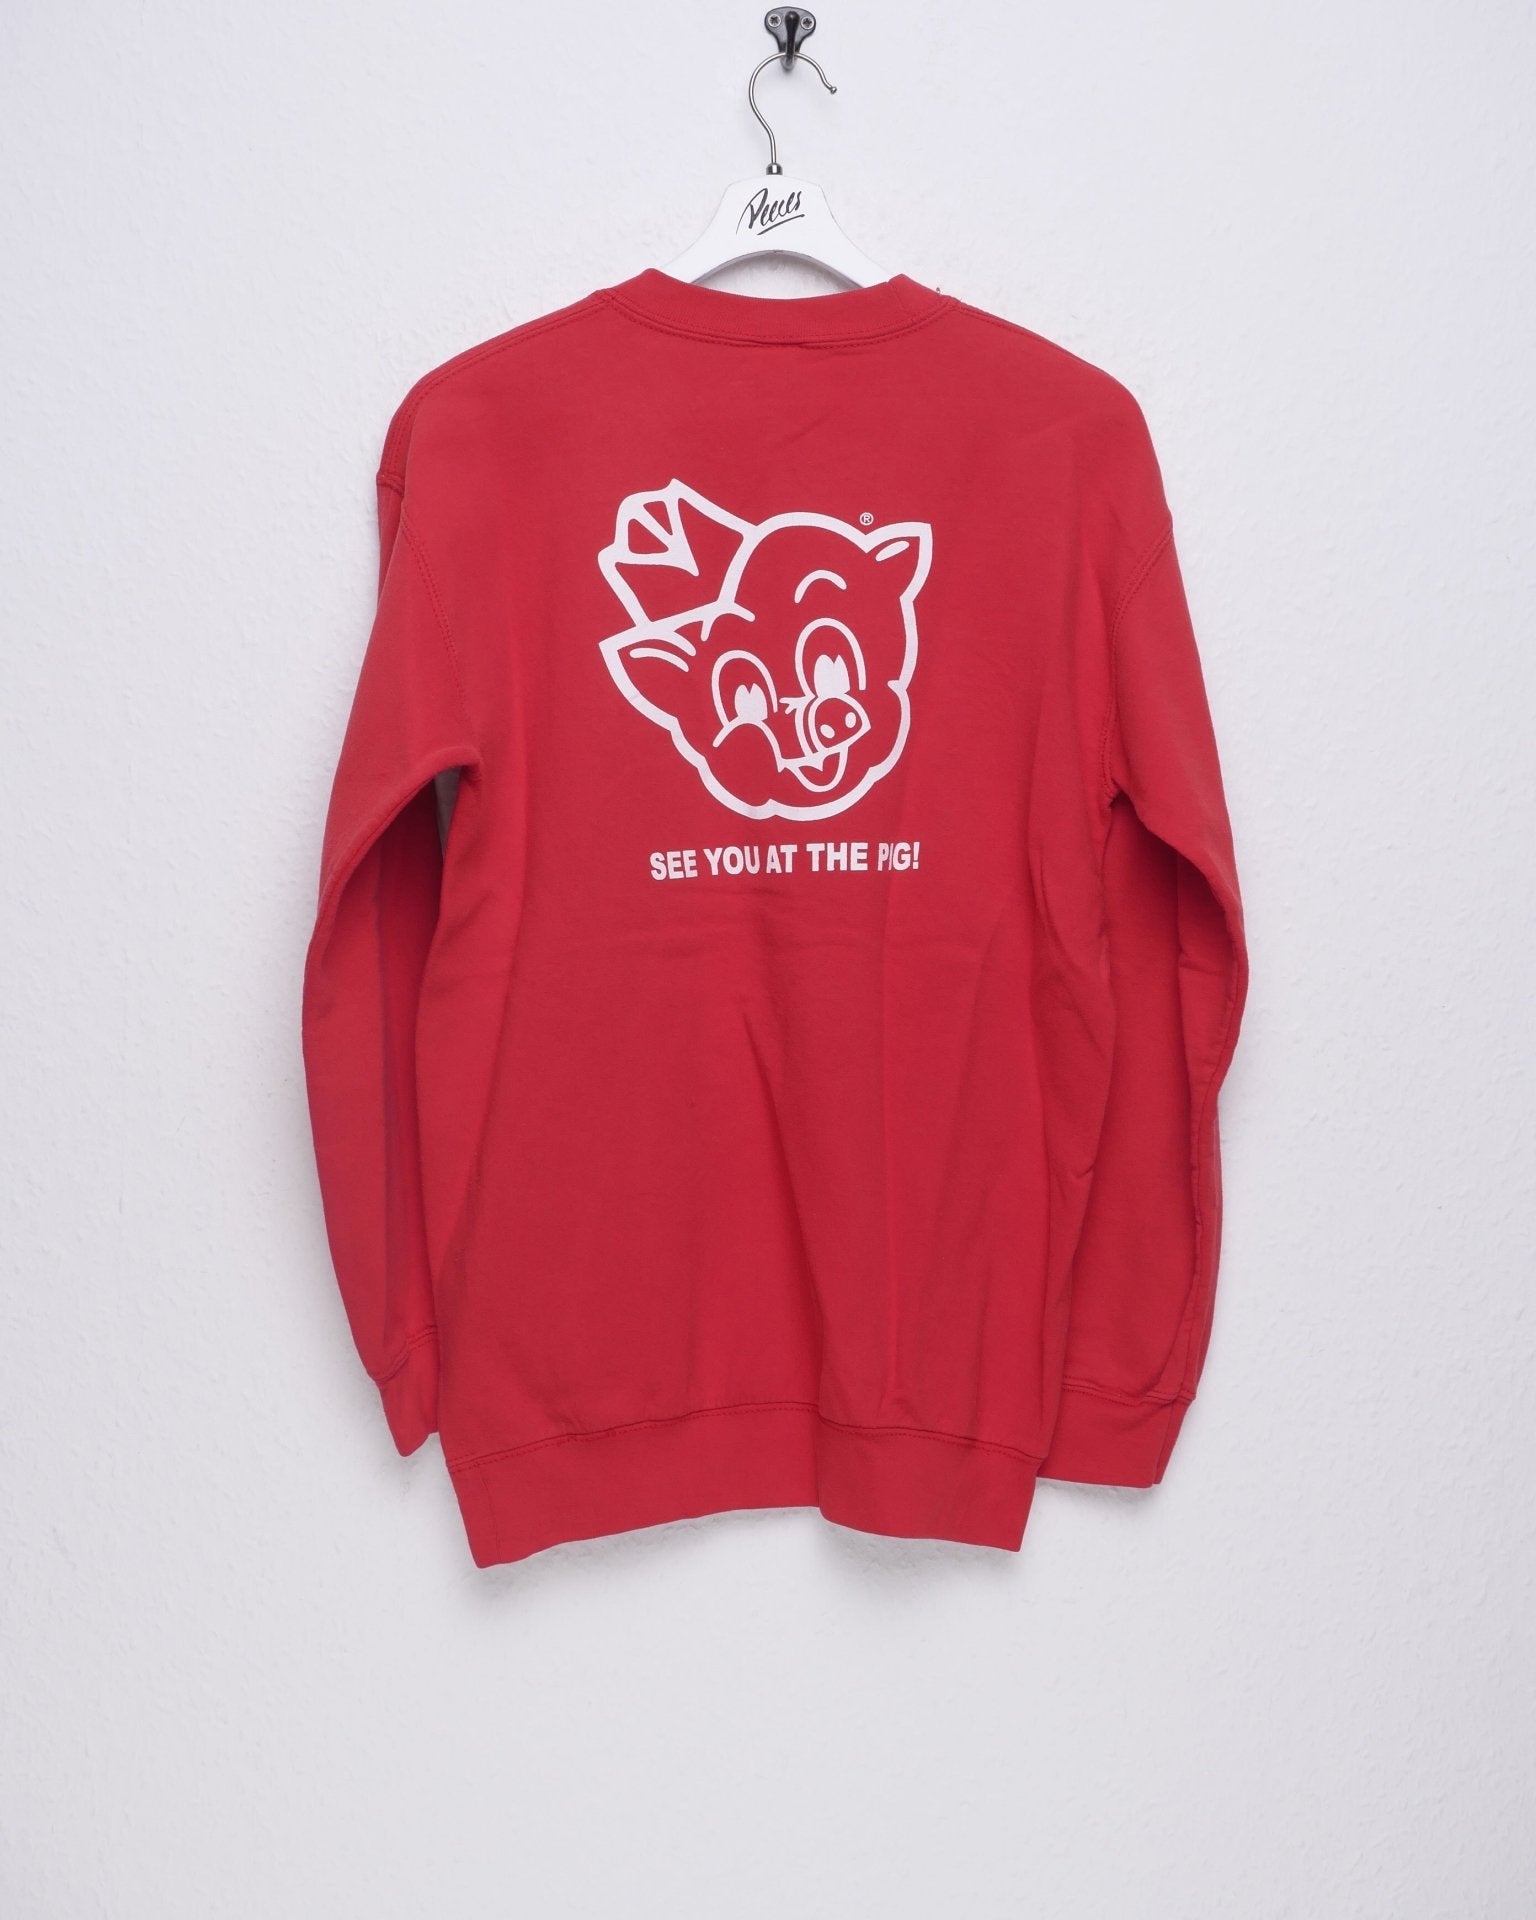 Piggly wiggly printed Logo Sweater - Peeces